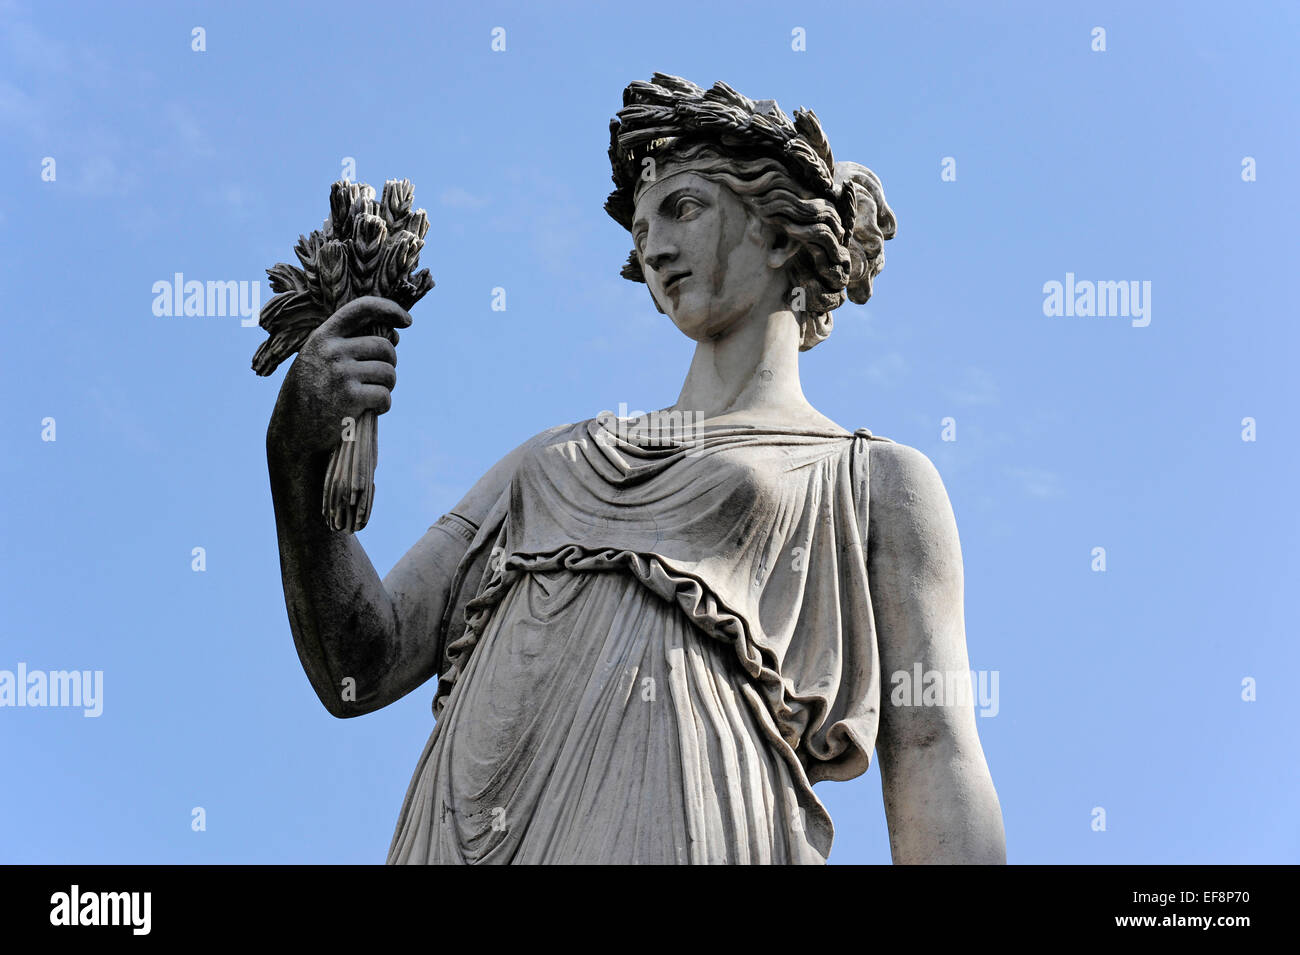 'L'estate', the Summer, one of the statues of the four seasons in Piazza del Popolo, Rome, Italy Stock Photo